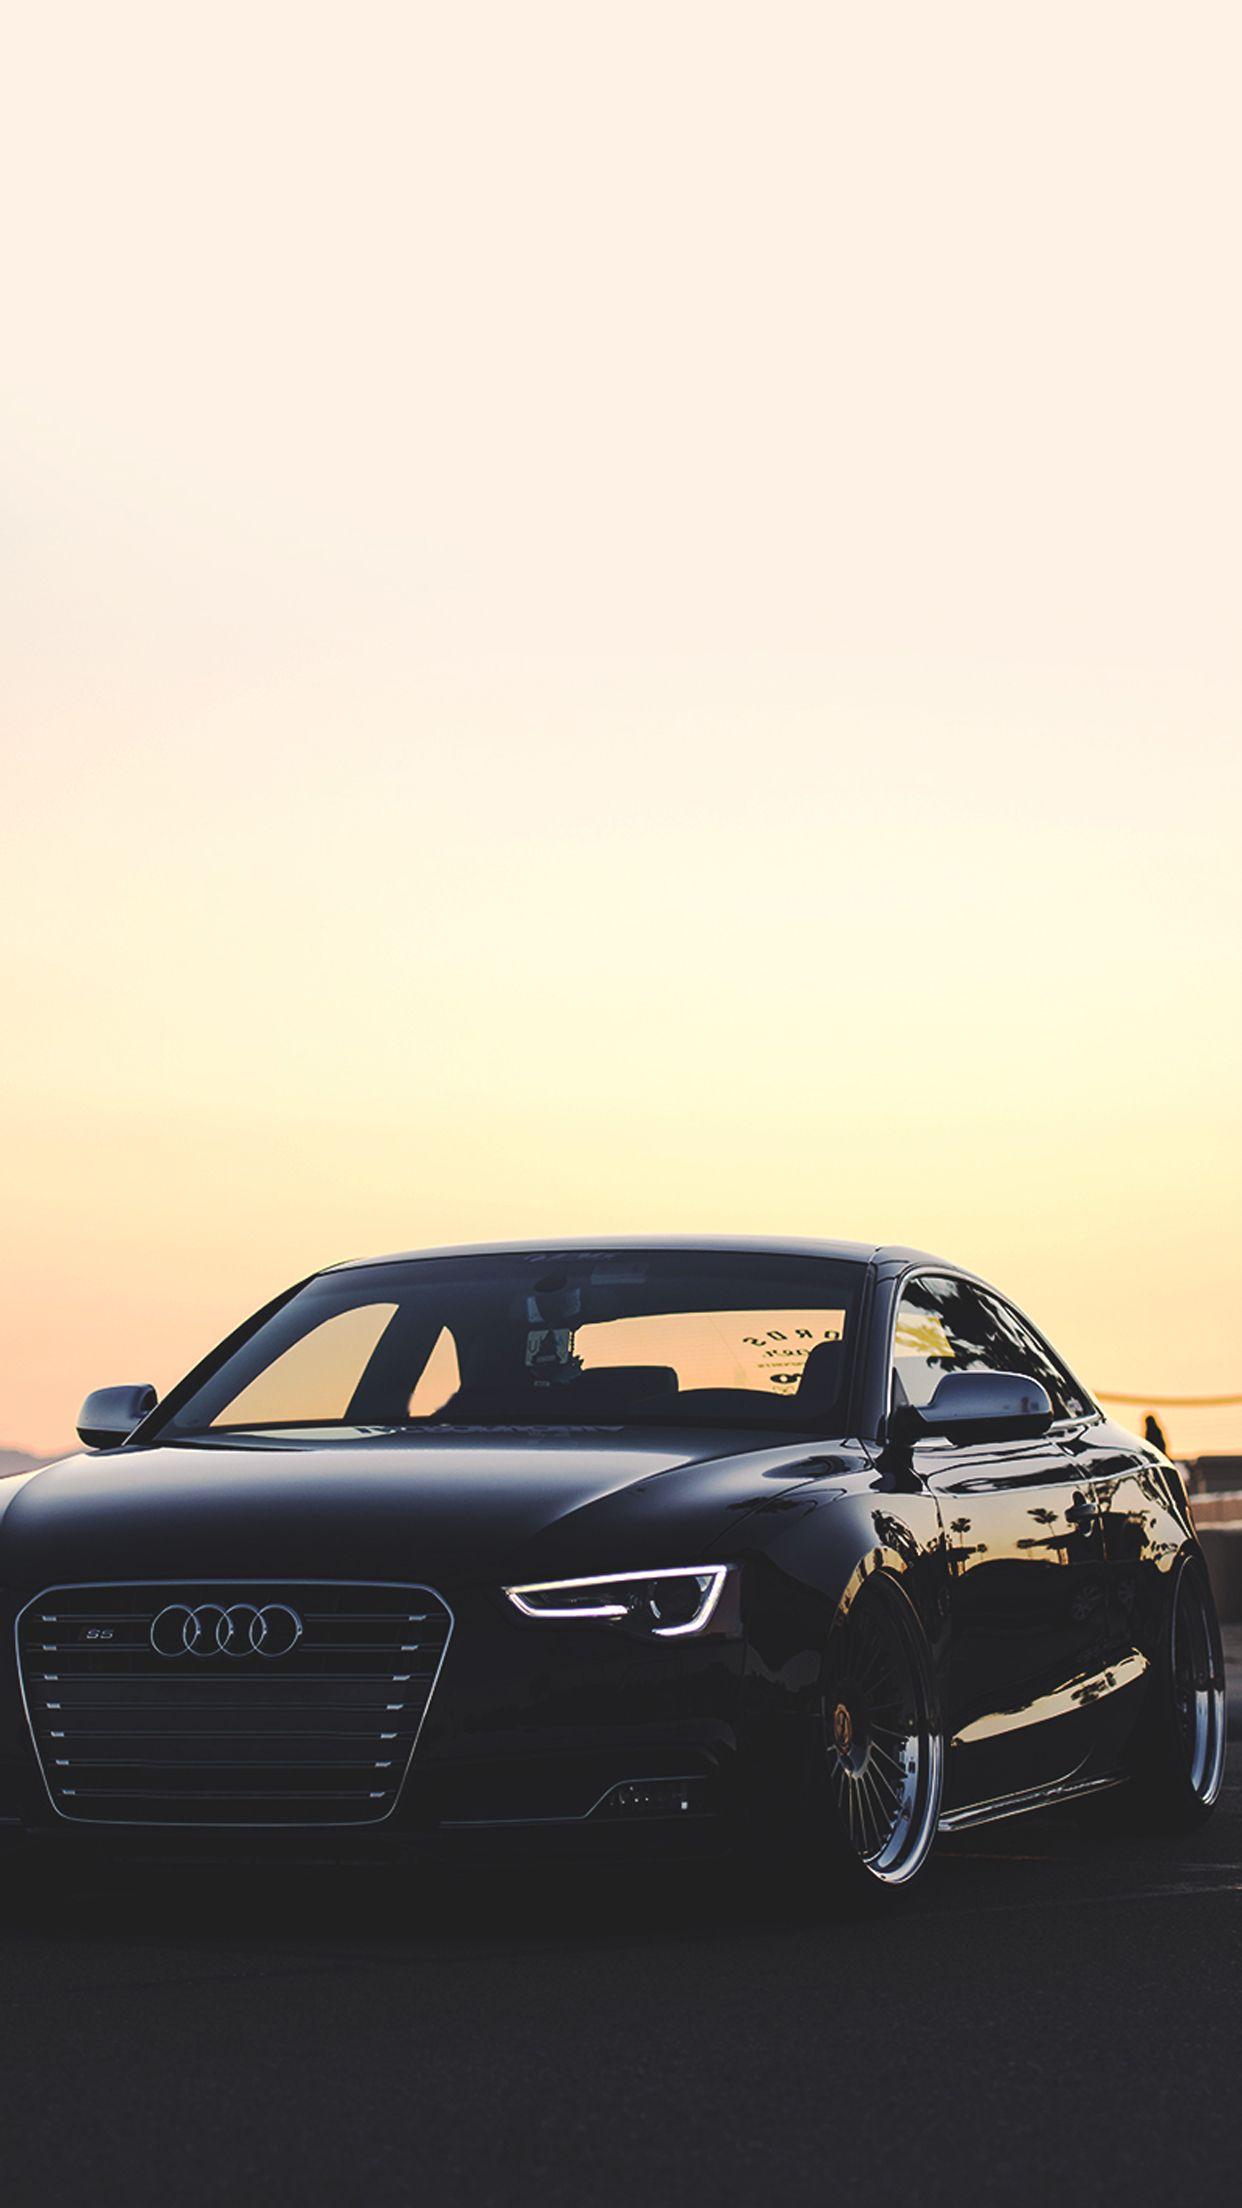 Audi A7 Hd Wallpapers For Pc - Wallpaperforu